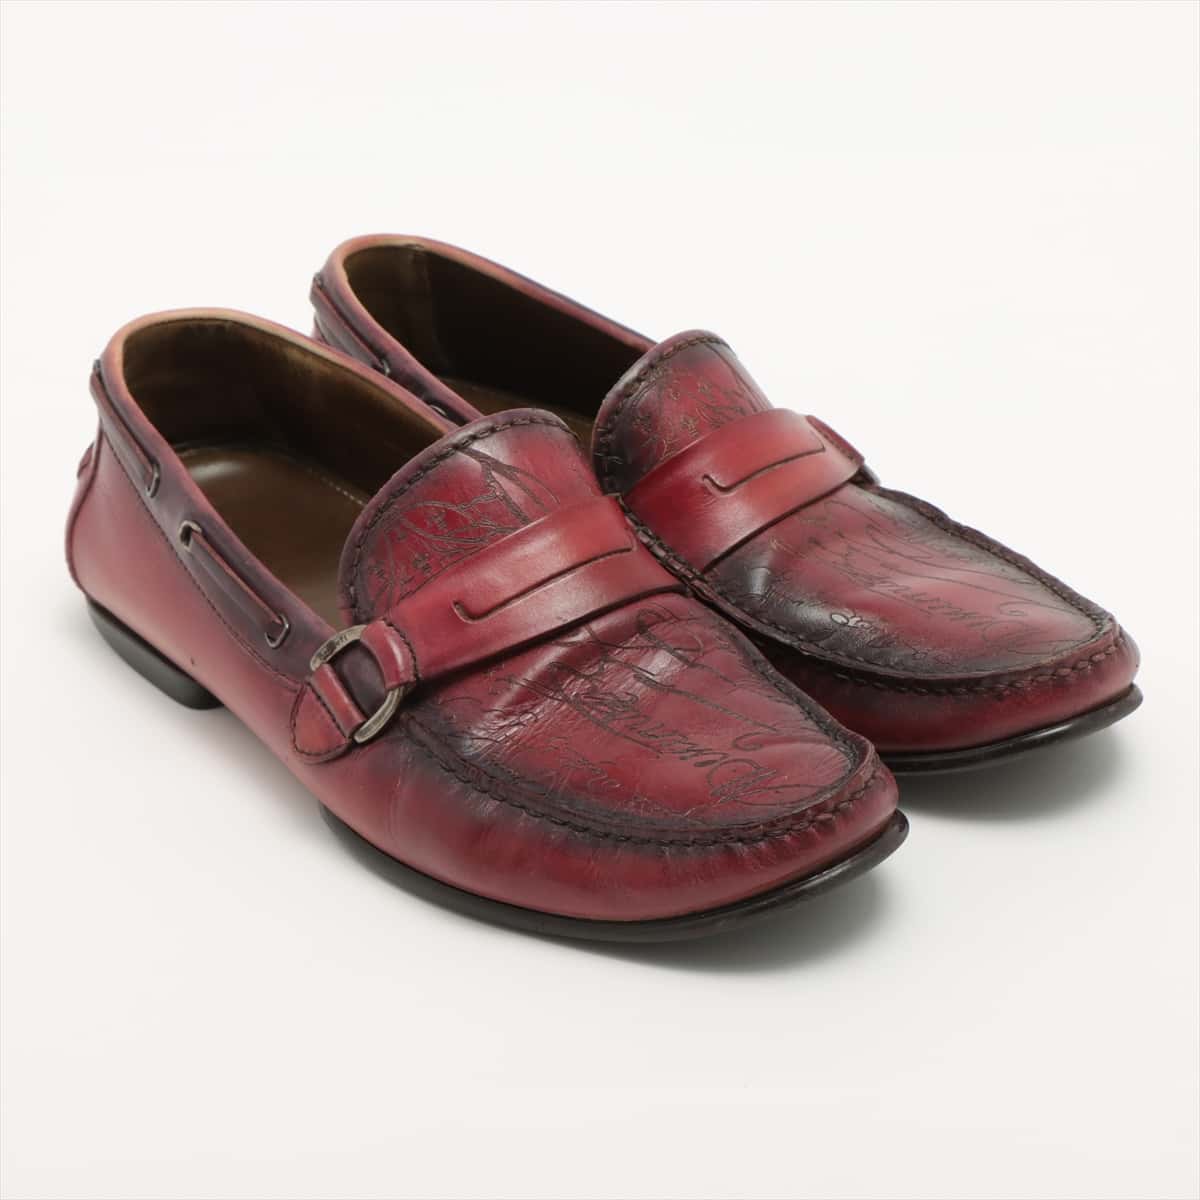 Berluti Calligraphy Leather Loafer Unknown size Men's Bordeaux